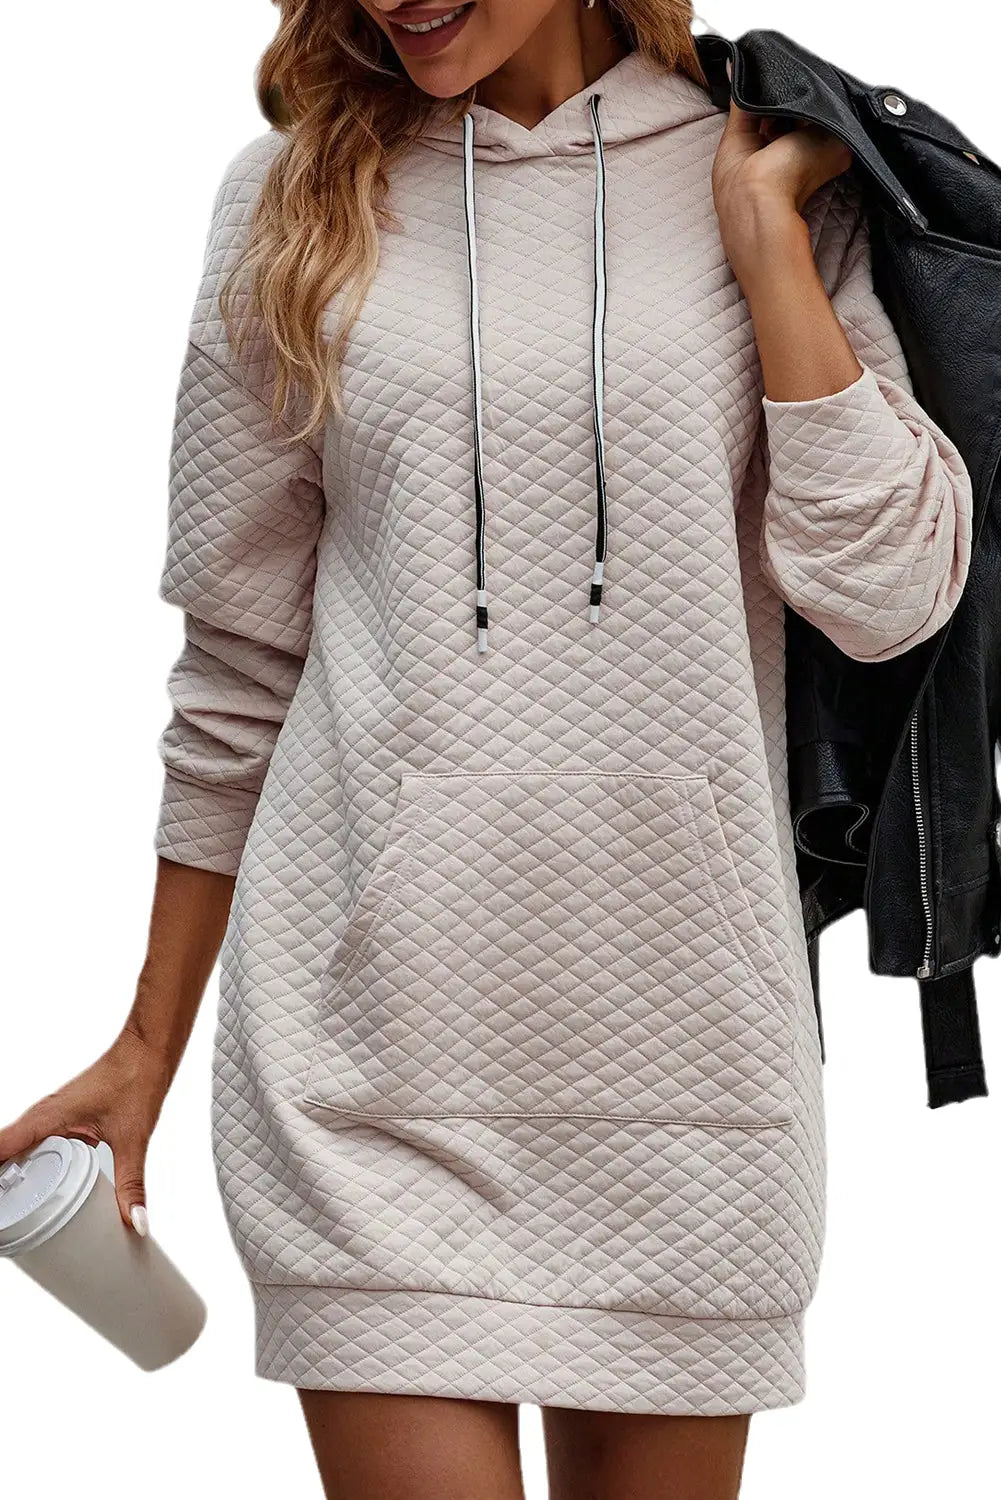 Parchment drawstring kangaroo pocket quilted hooded dress - mini dresses